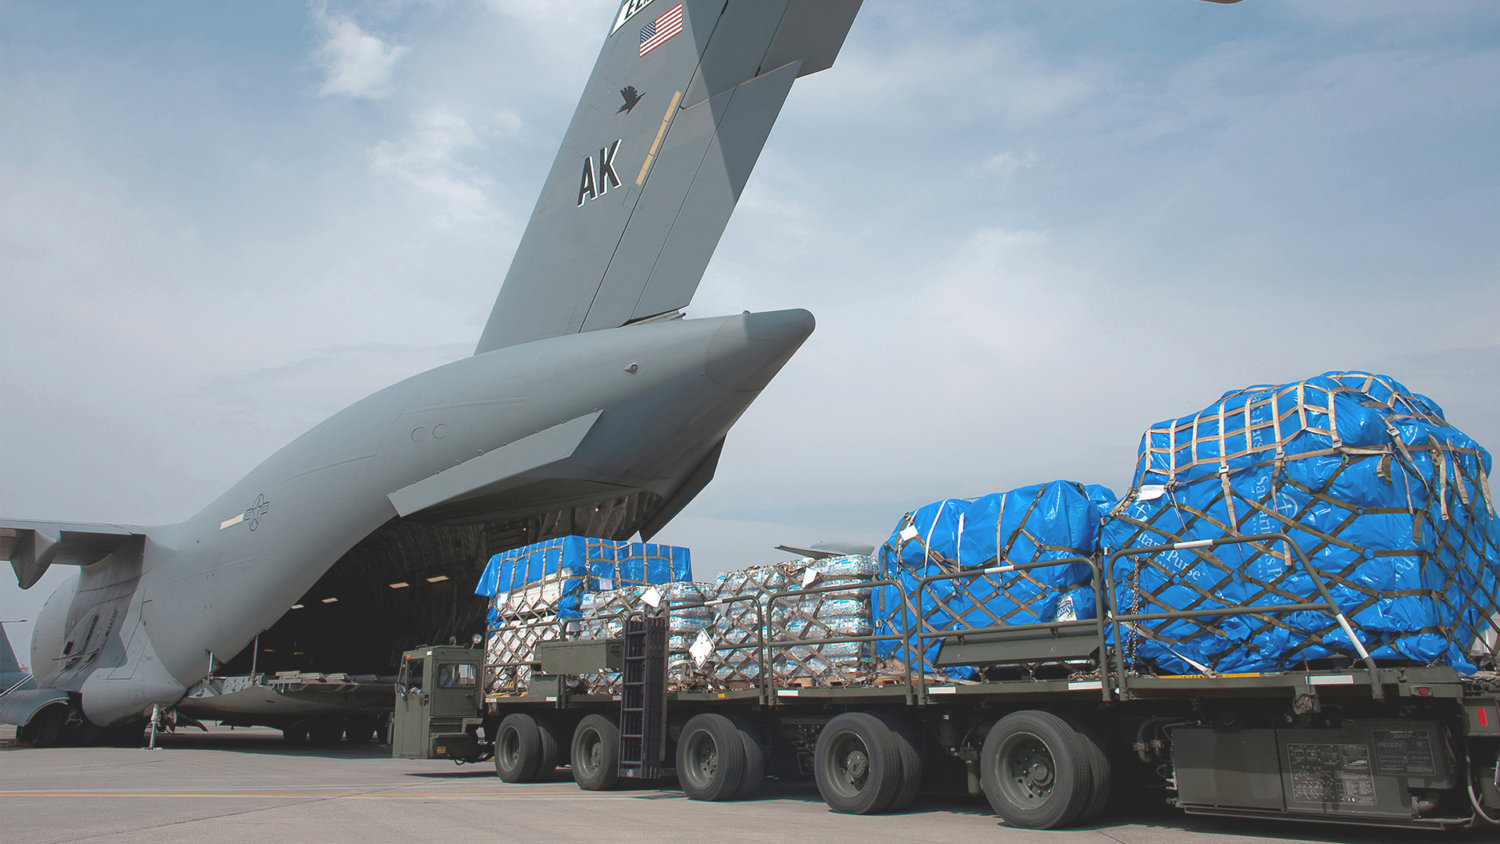 Items being loaded on cargo military plane